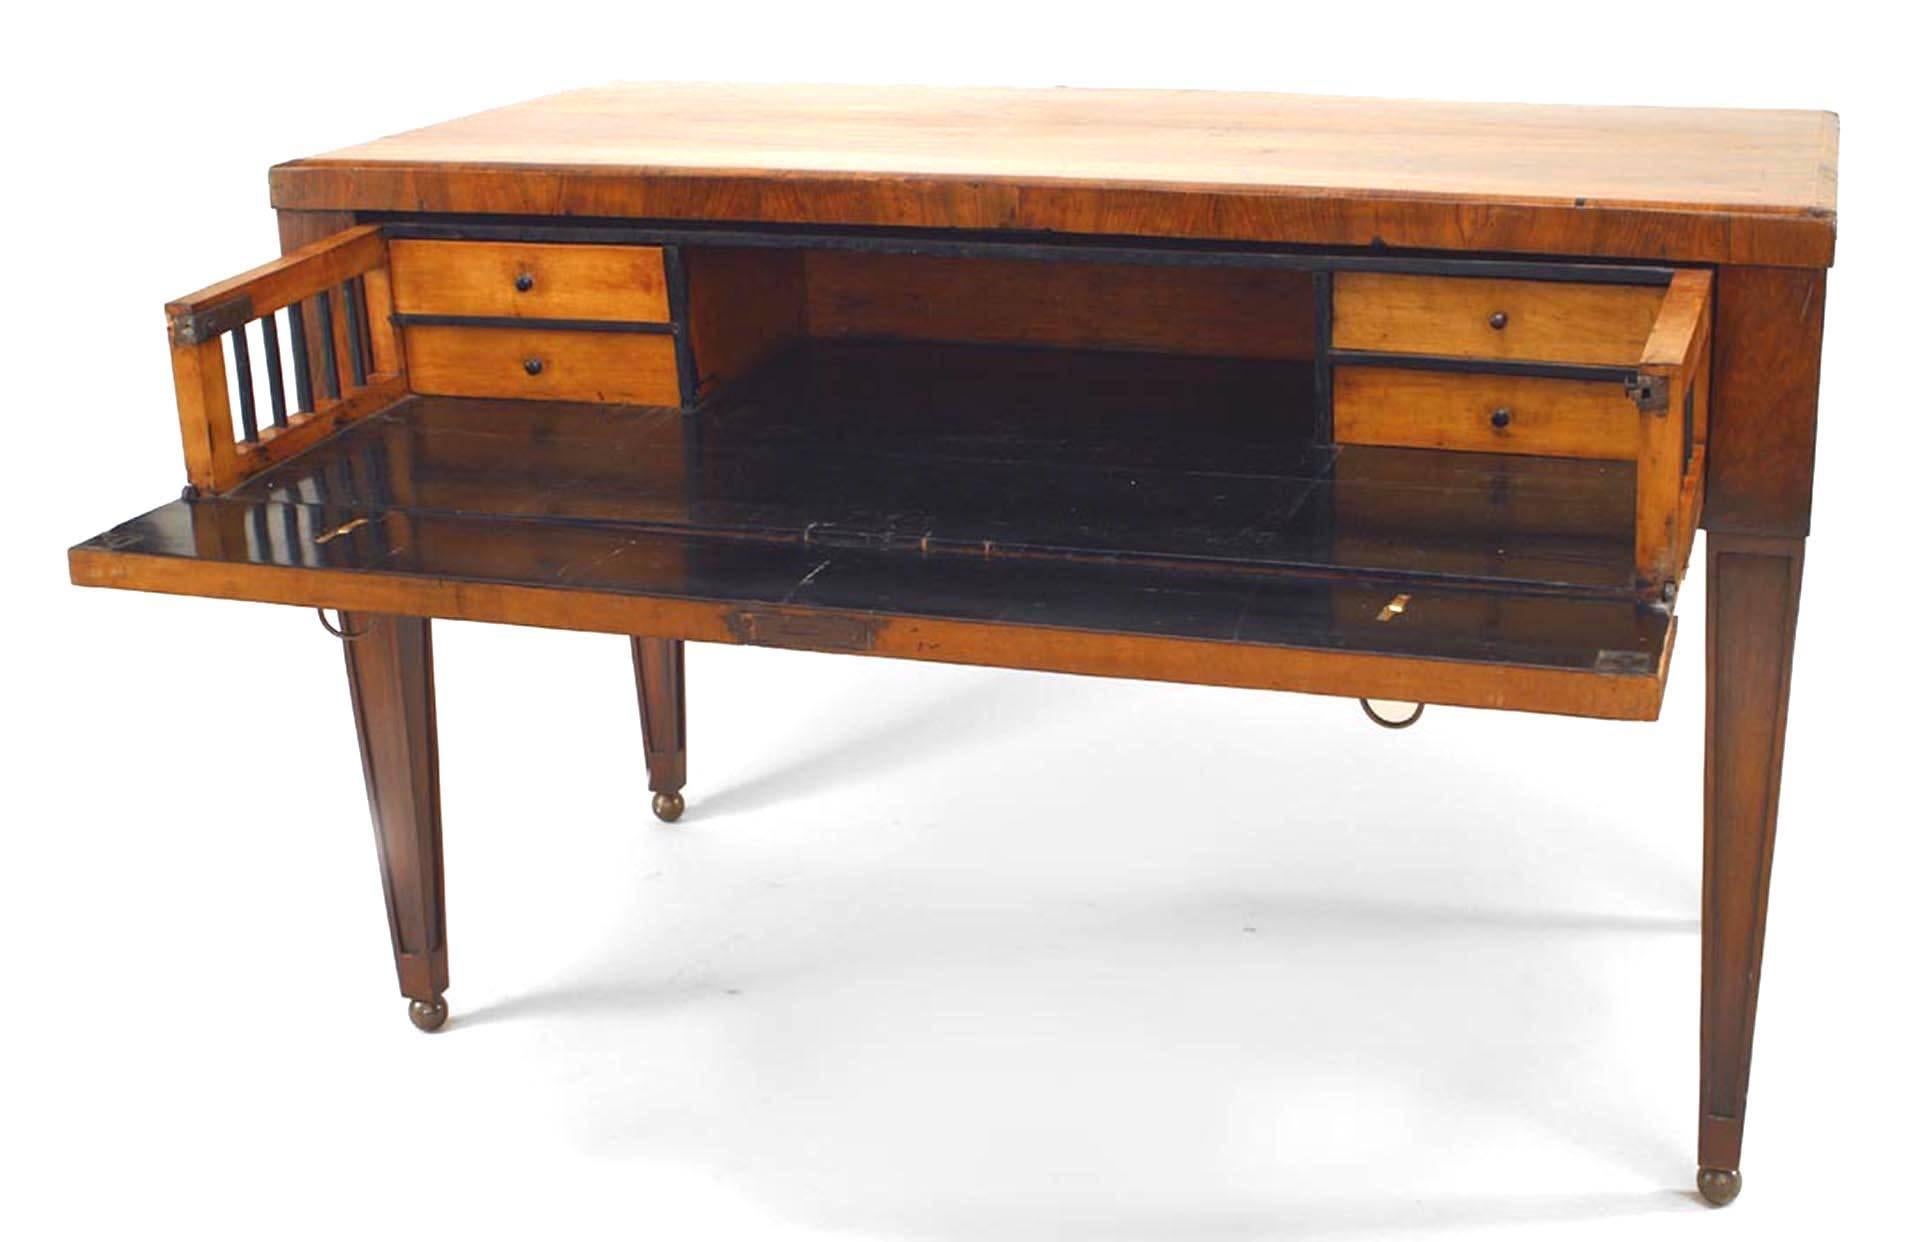 Continental neoclassic walnut writing table with fall front fitted secretaire drawer on replaced legs (early 19th century and later).
 